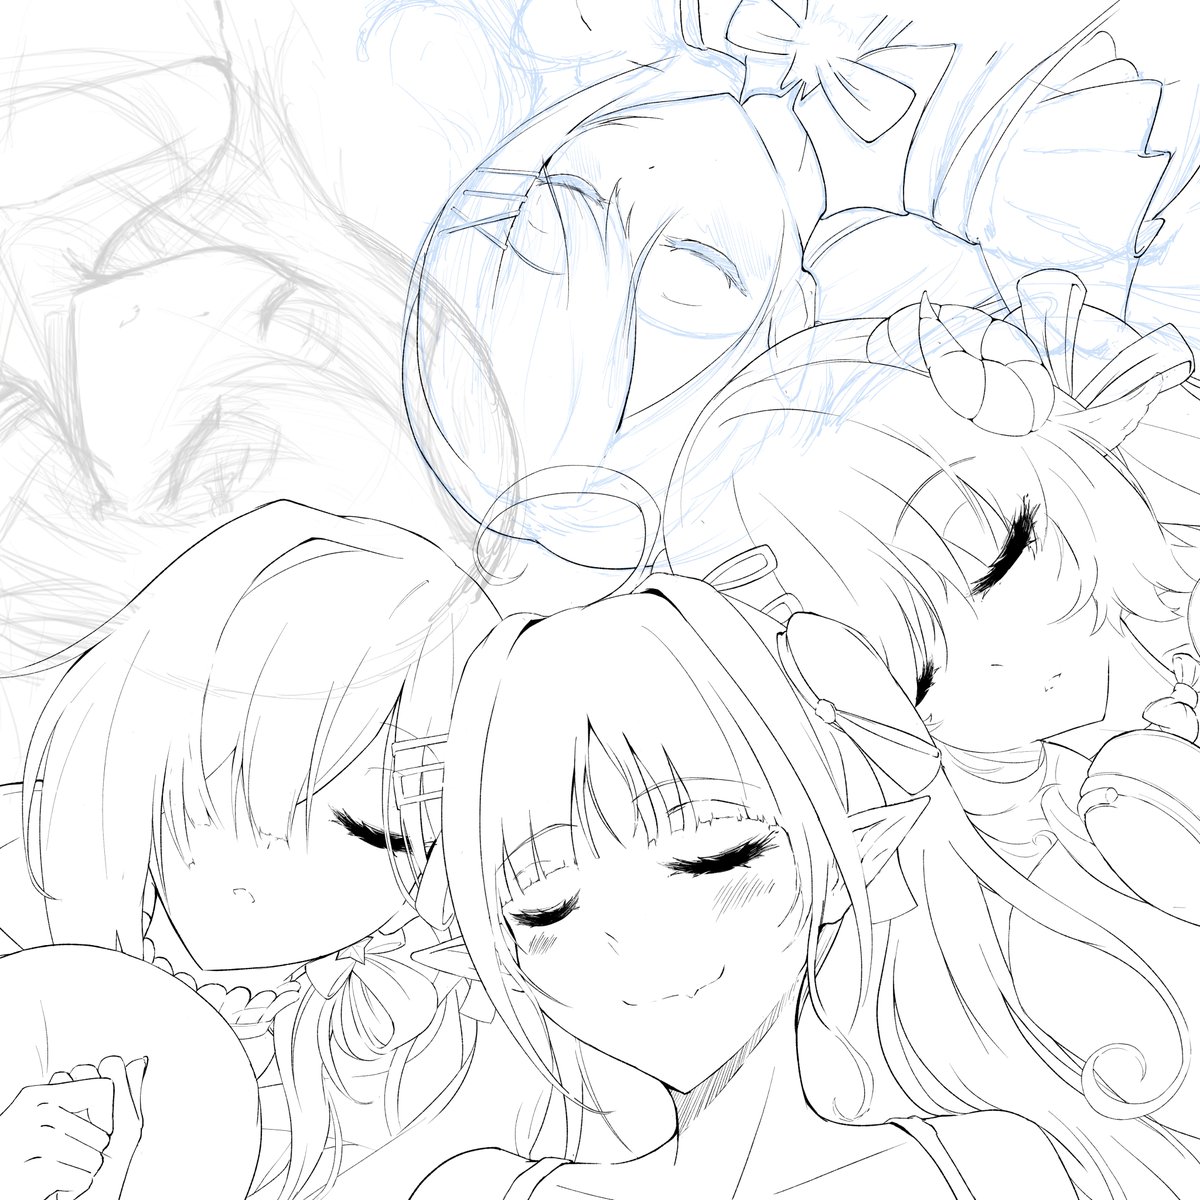 I SWEAR I WILL FIND TIME TO FINISH THIS 